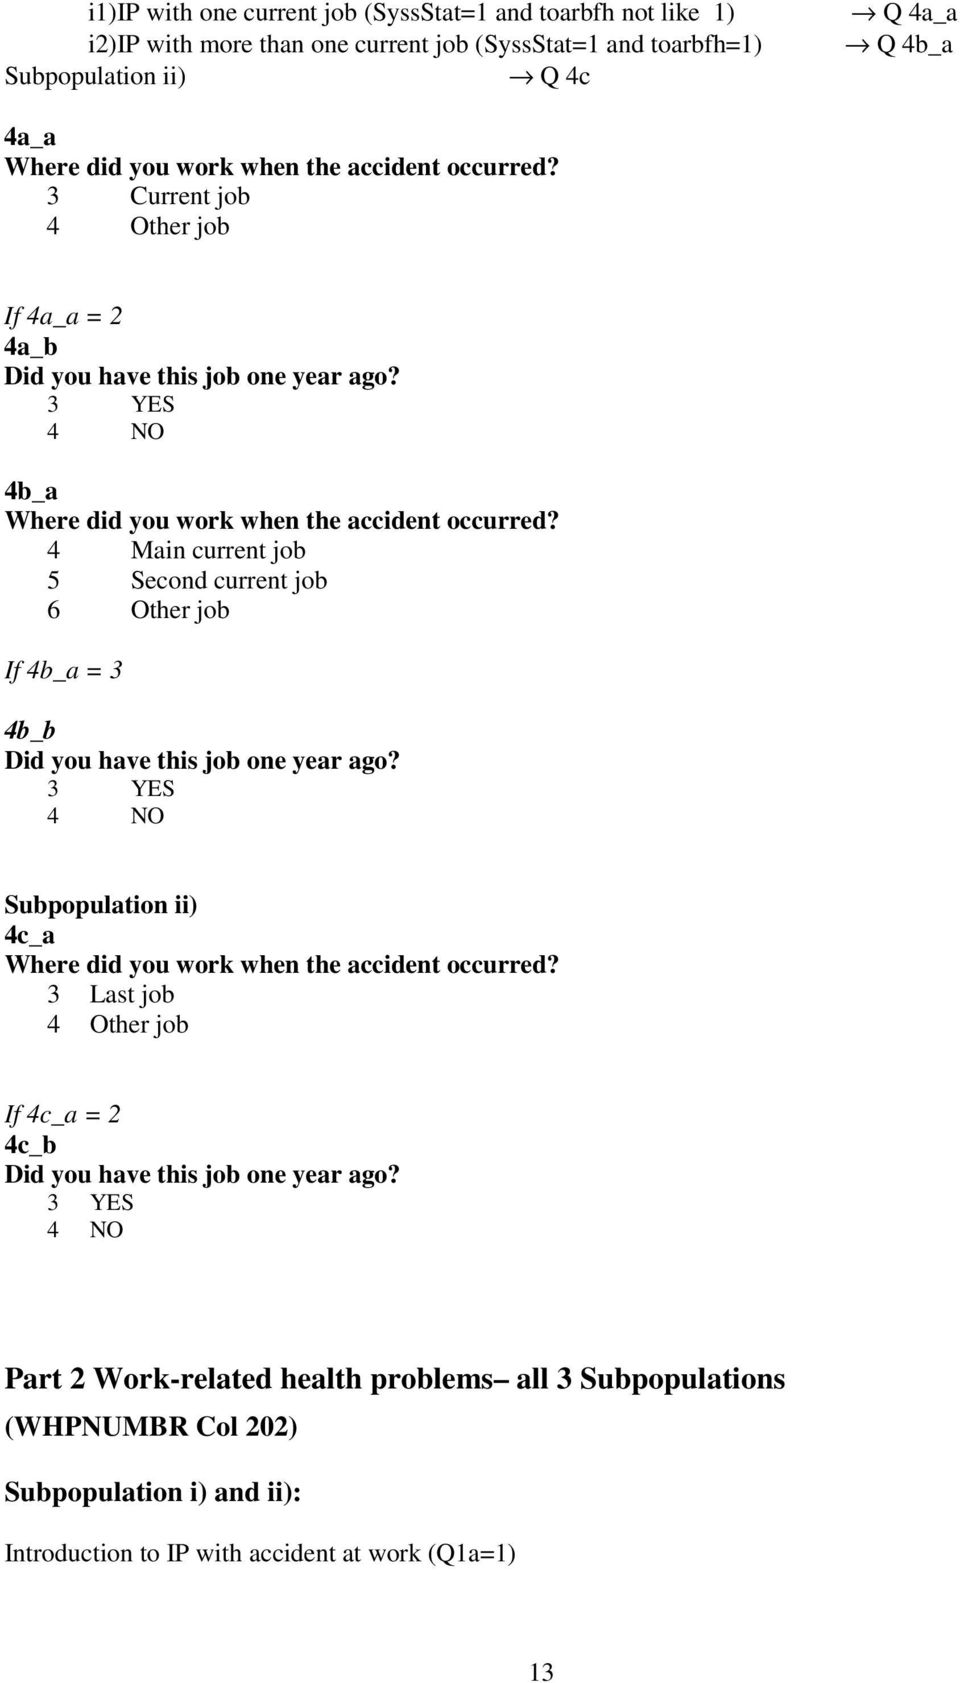 4 Main current job 5 Second current job 6 Other job If 4b_a = 3 4b_b Did you have this job one year ago? 3 YES 4 NO Subpopulation ii) 4c_a Where did you work when the accident occurred?